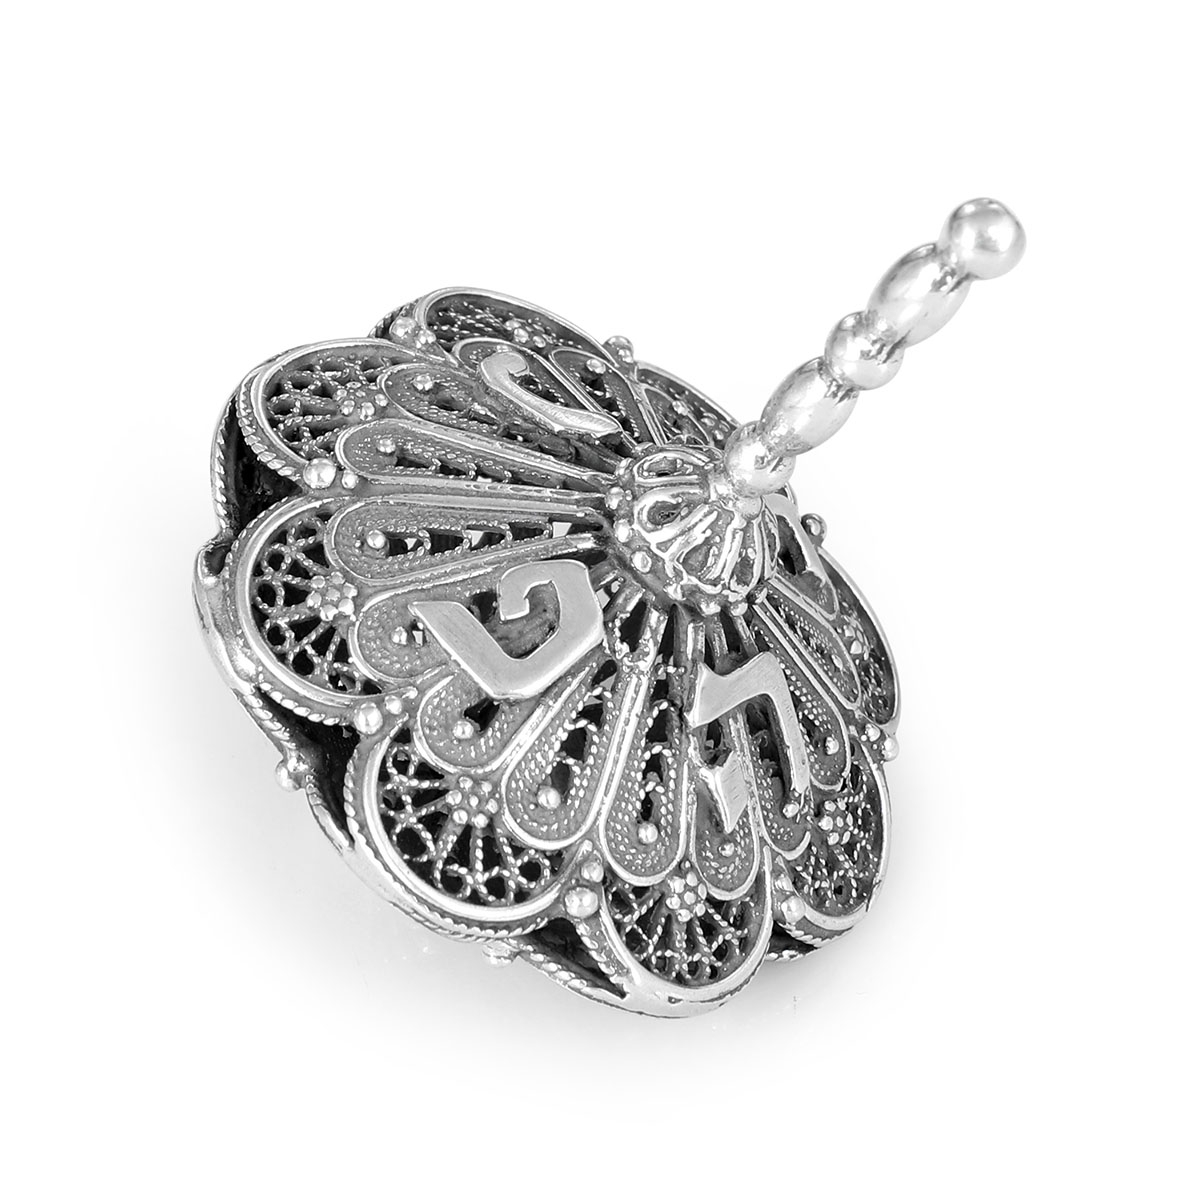 Traditional Yemenite Art Handcrafted Sterling Silver Ornate Rounded Dreidel With Filigree Design - 1